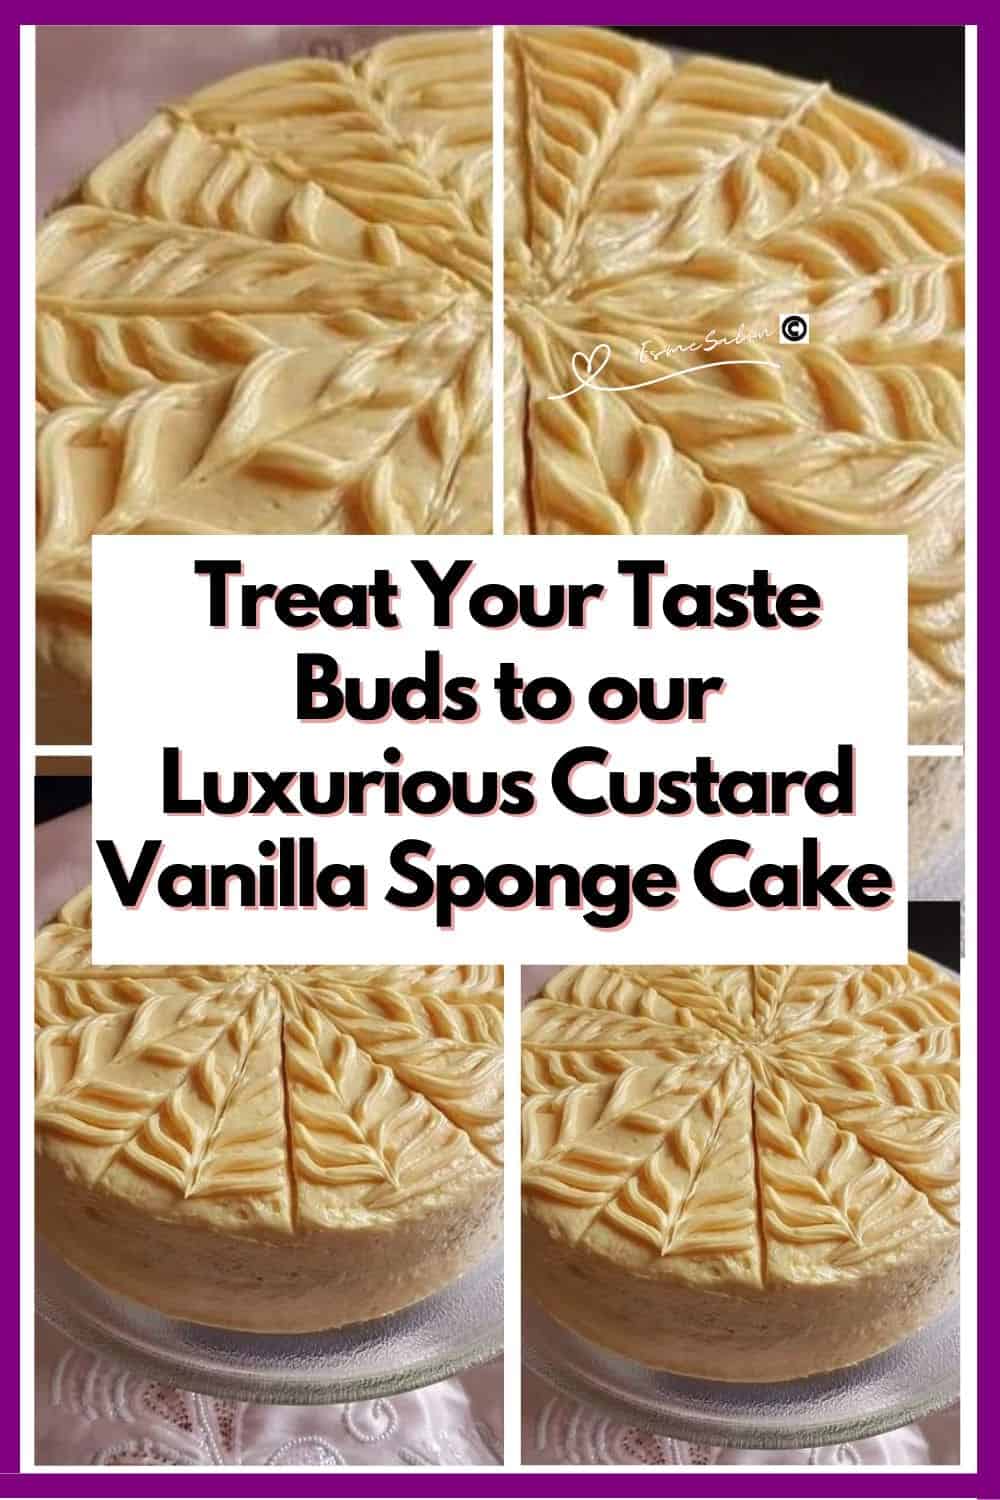 animage of a Custard Vanilla Sponge Cake decorated and cut into slices